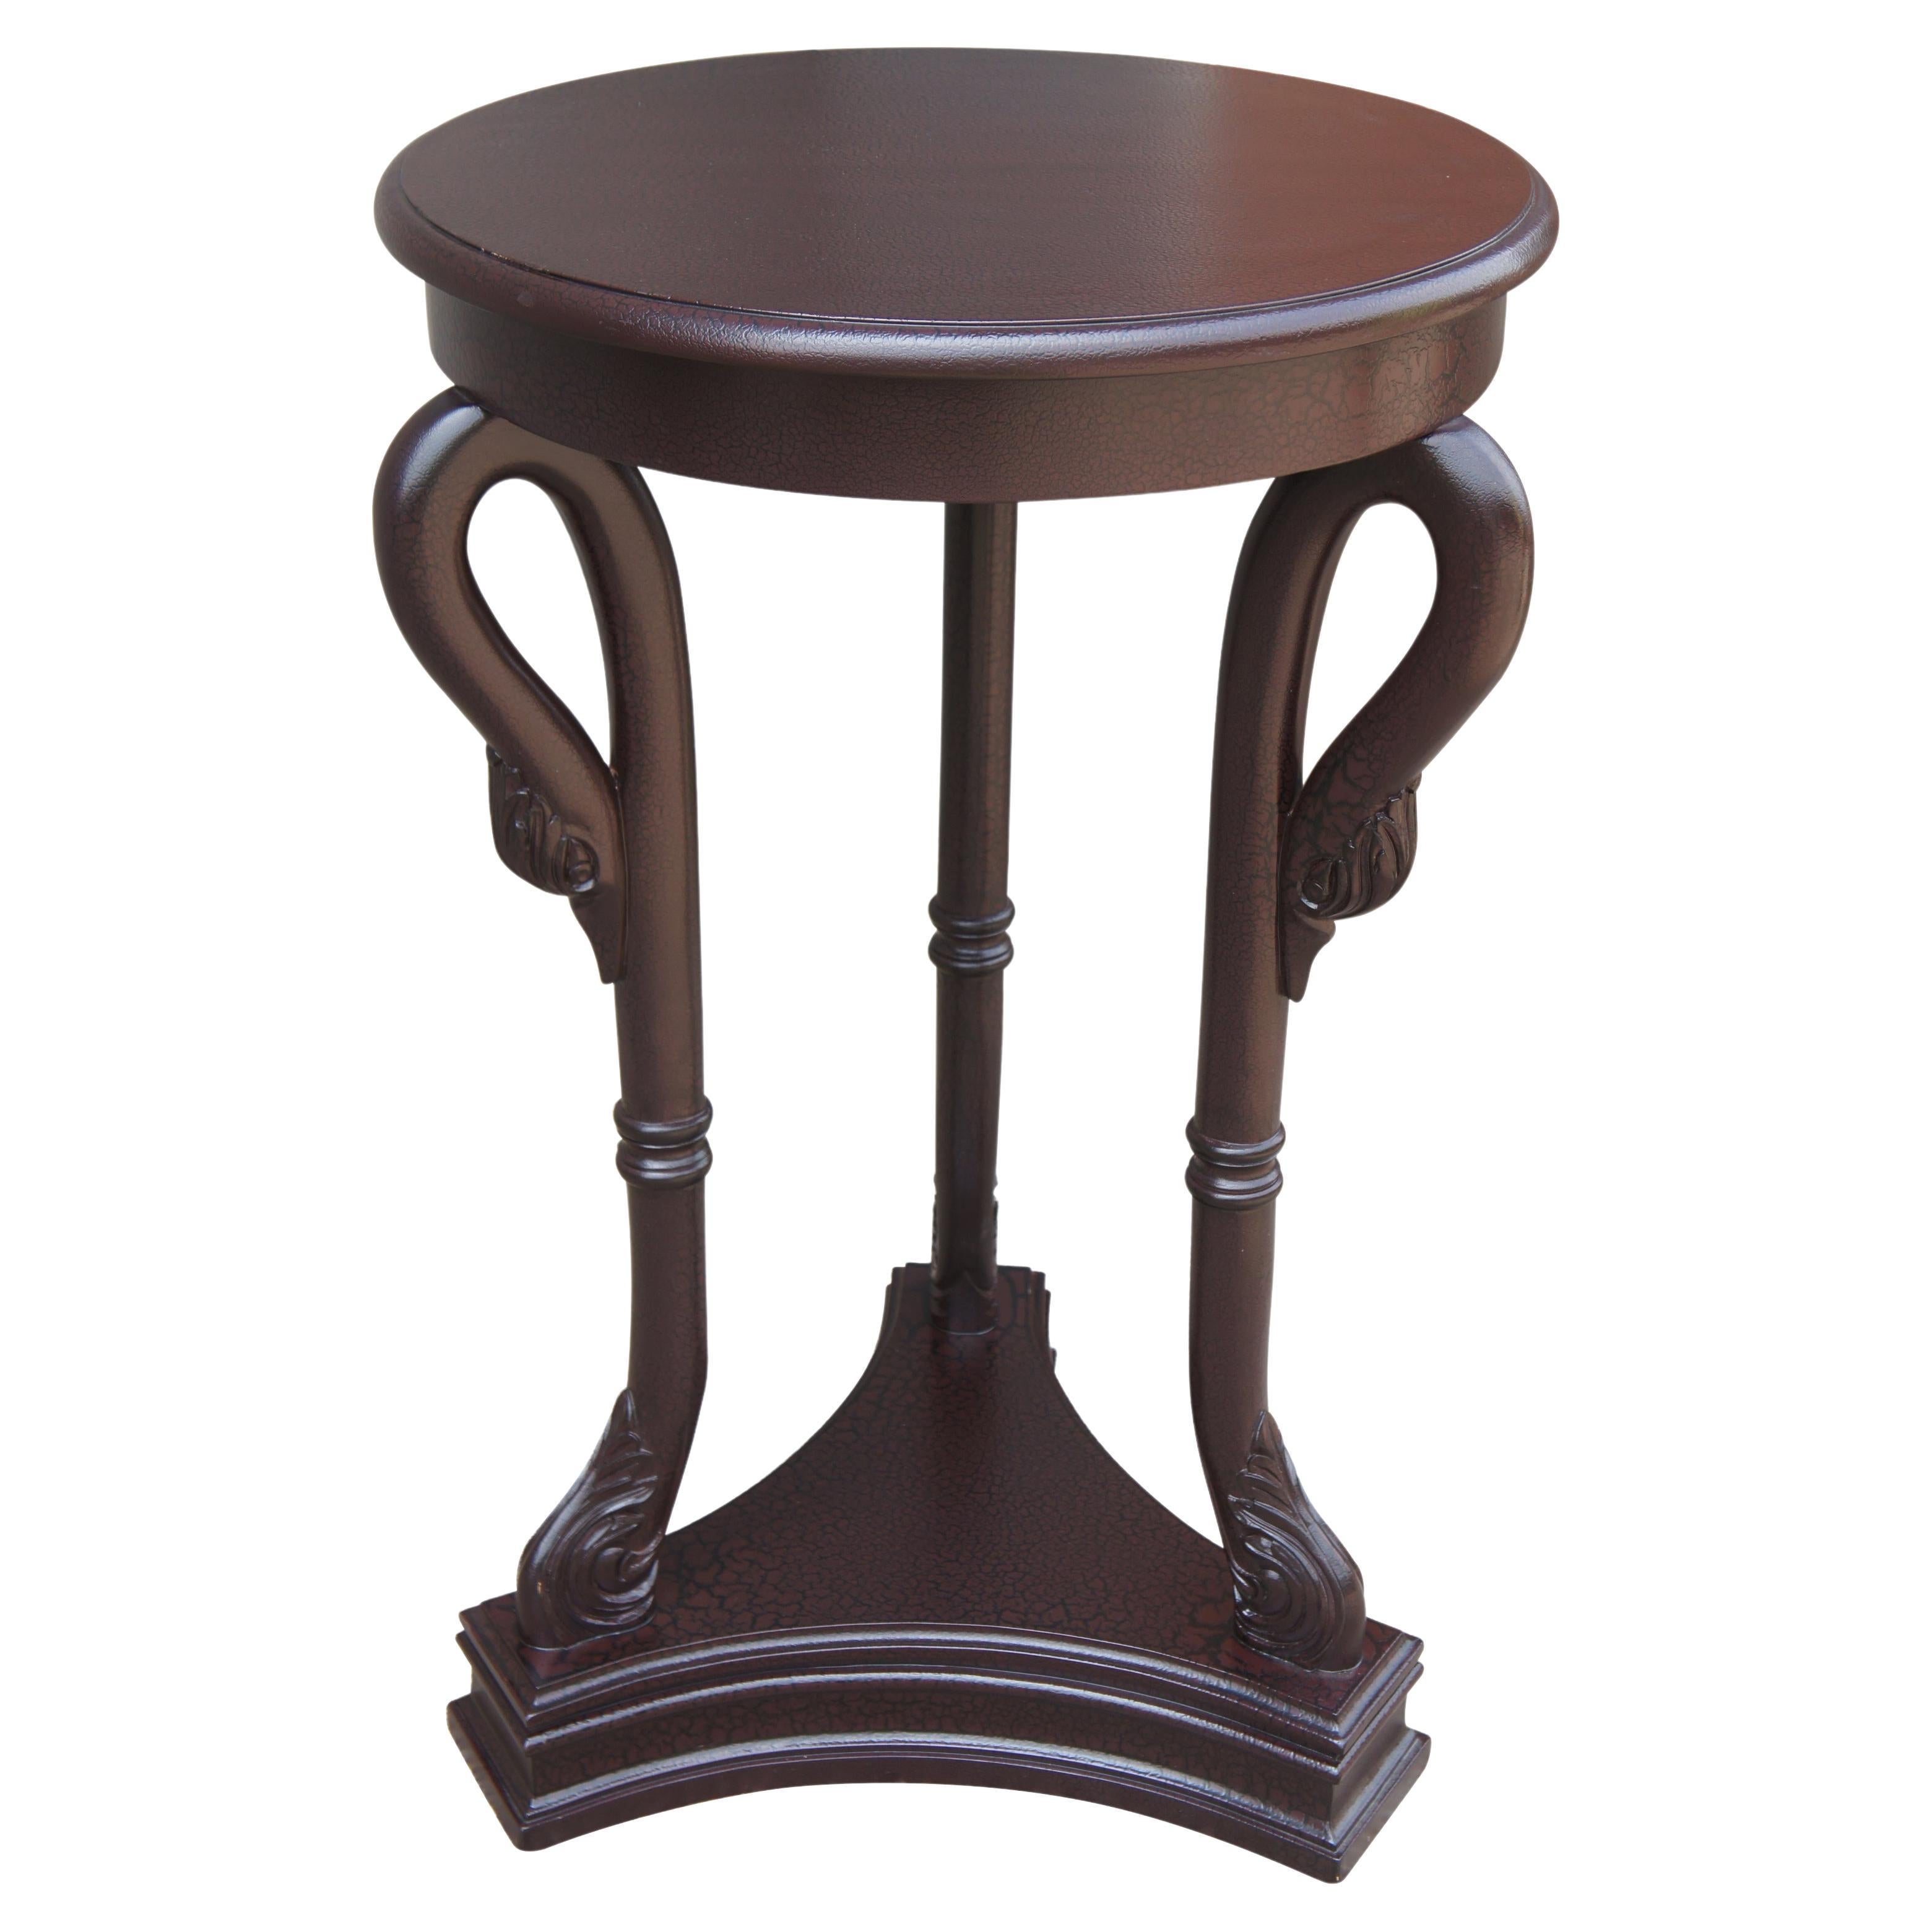 French Directoire Crackle Lacquer Gueridon Swan Pedestal Table Sculpture Stand For Sale